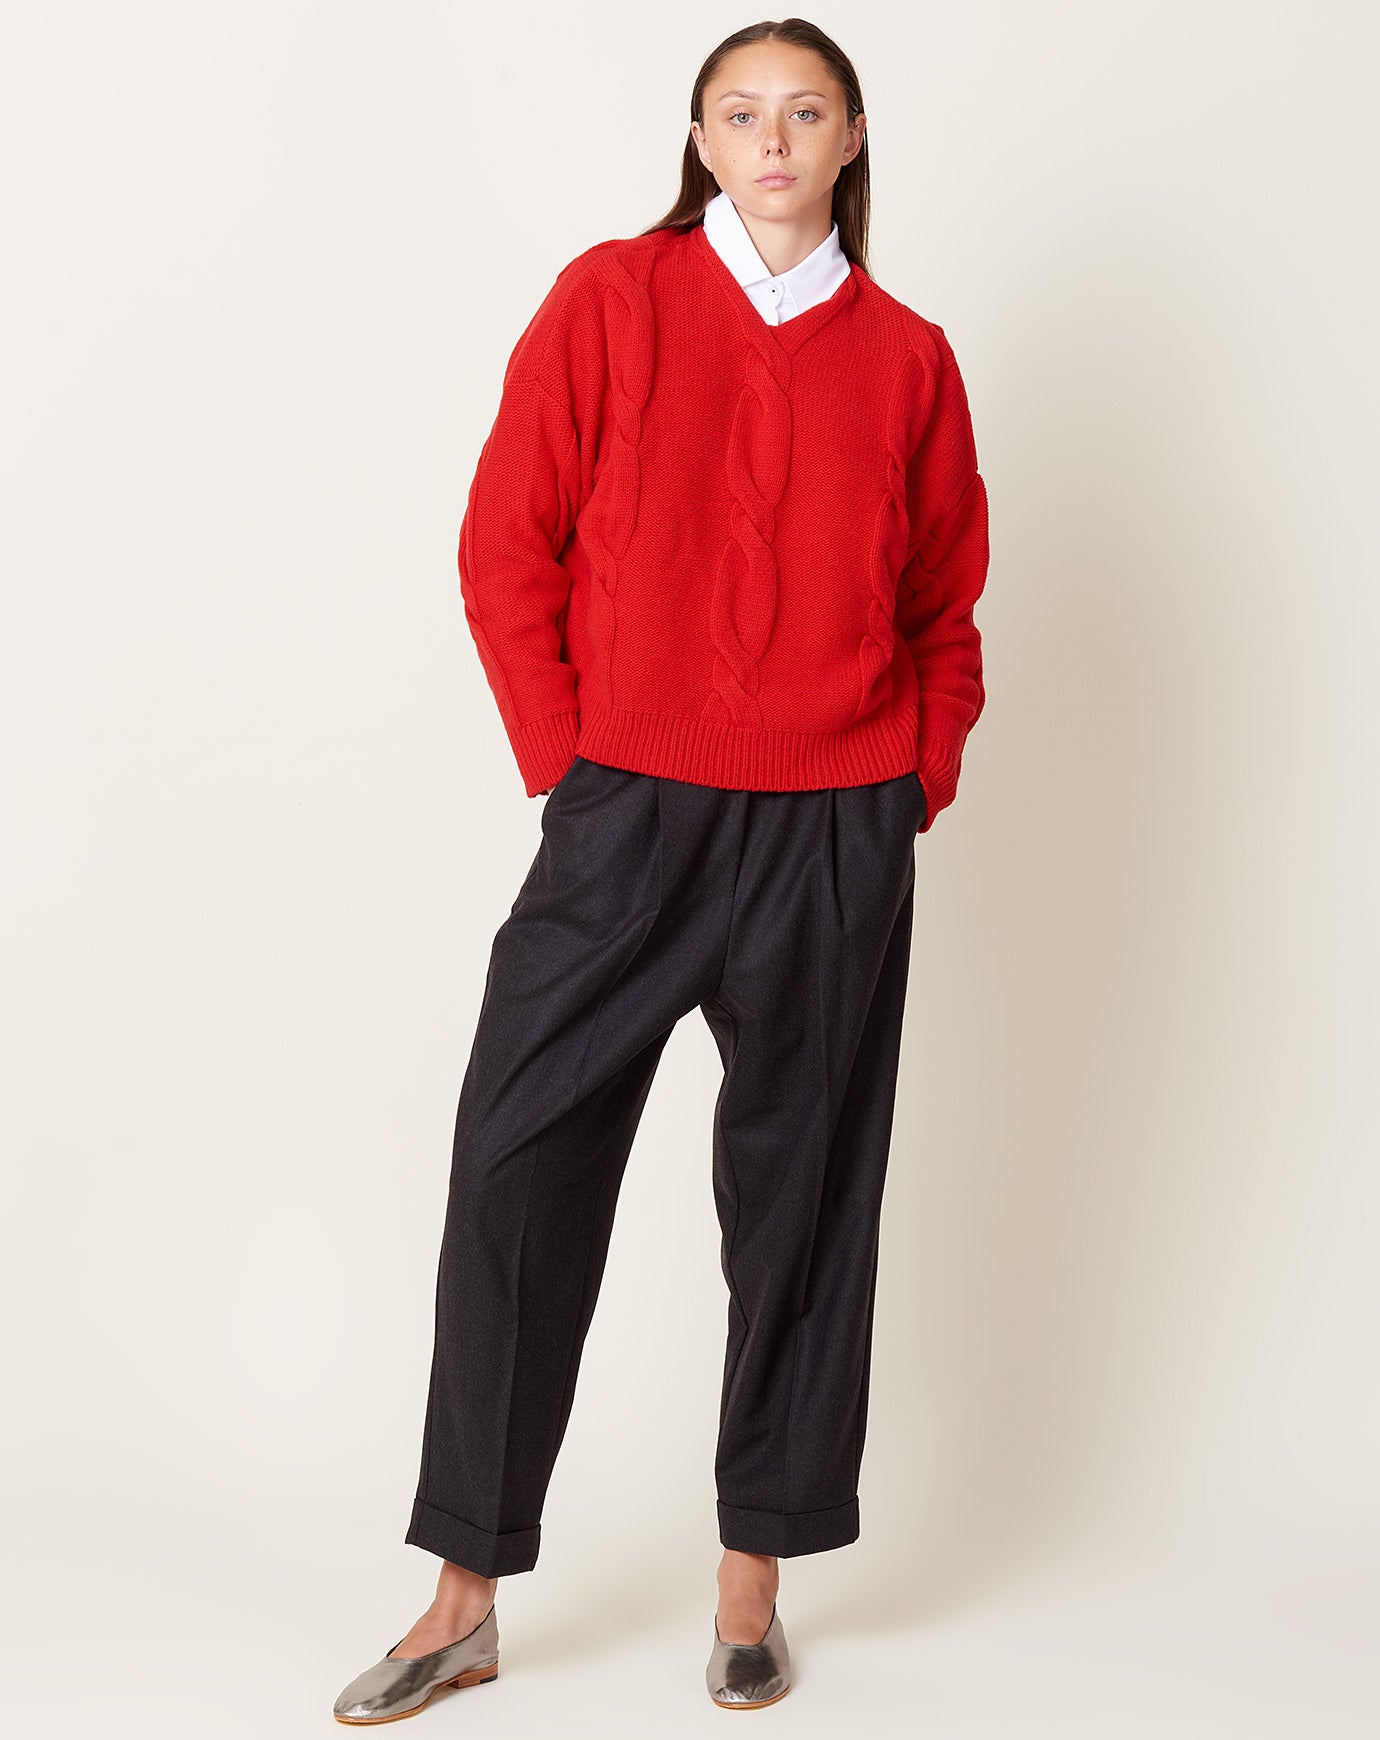 Cordera Wool & Cashmere Braided Sweater in Red